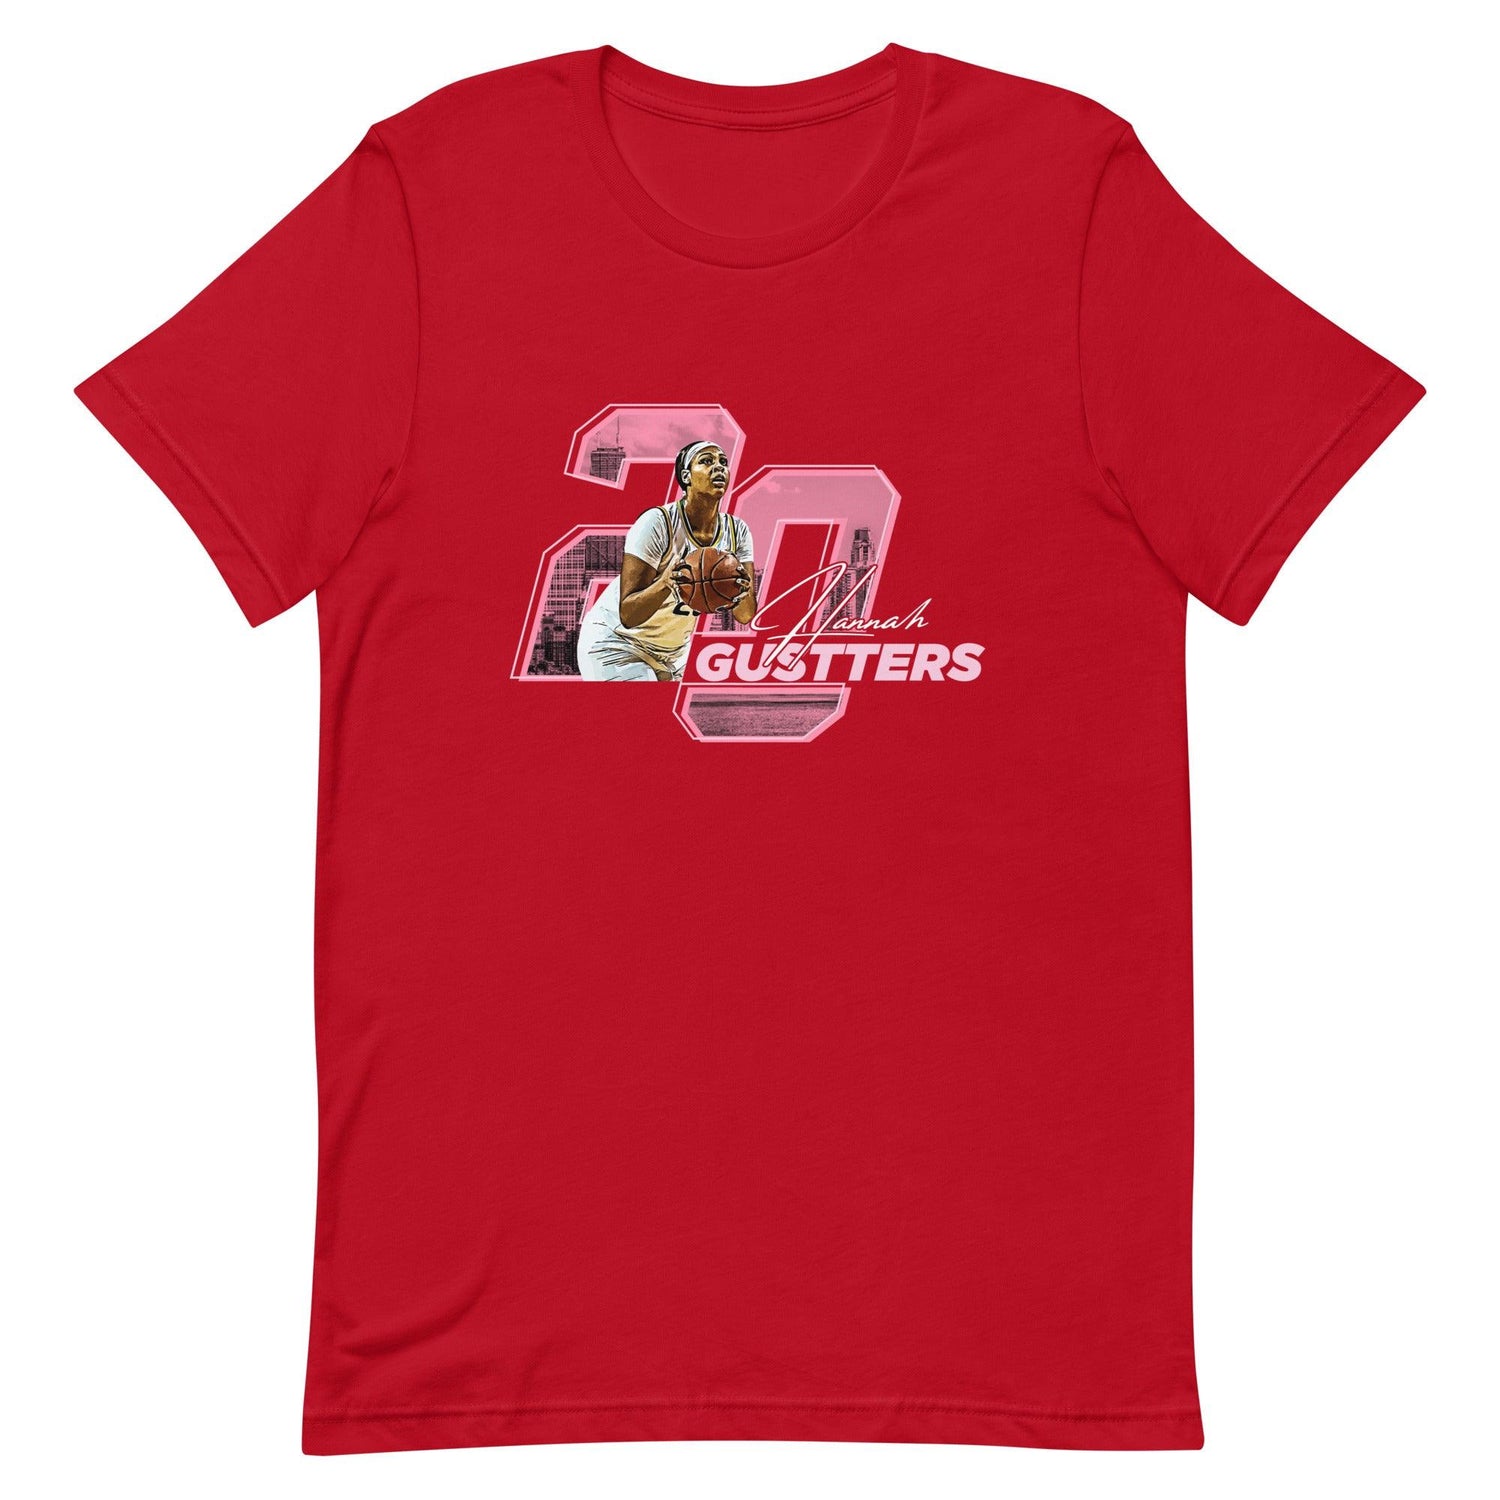 Hannah Gusters "Gameday" t-shirt - Fan Arch